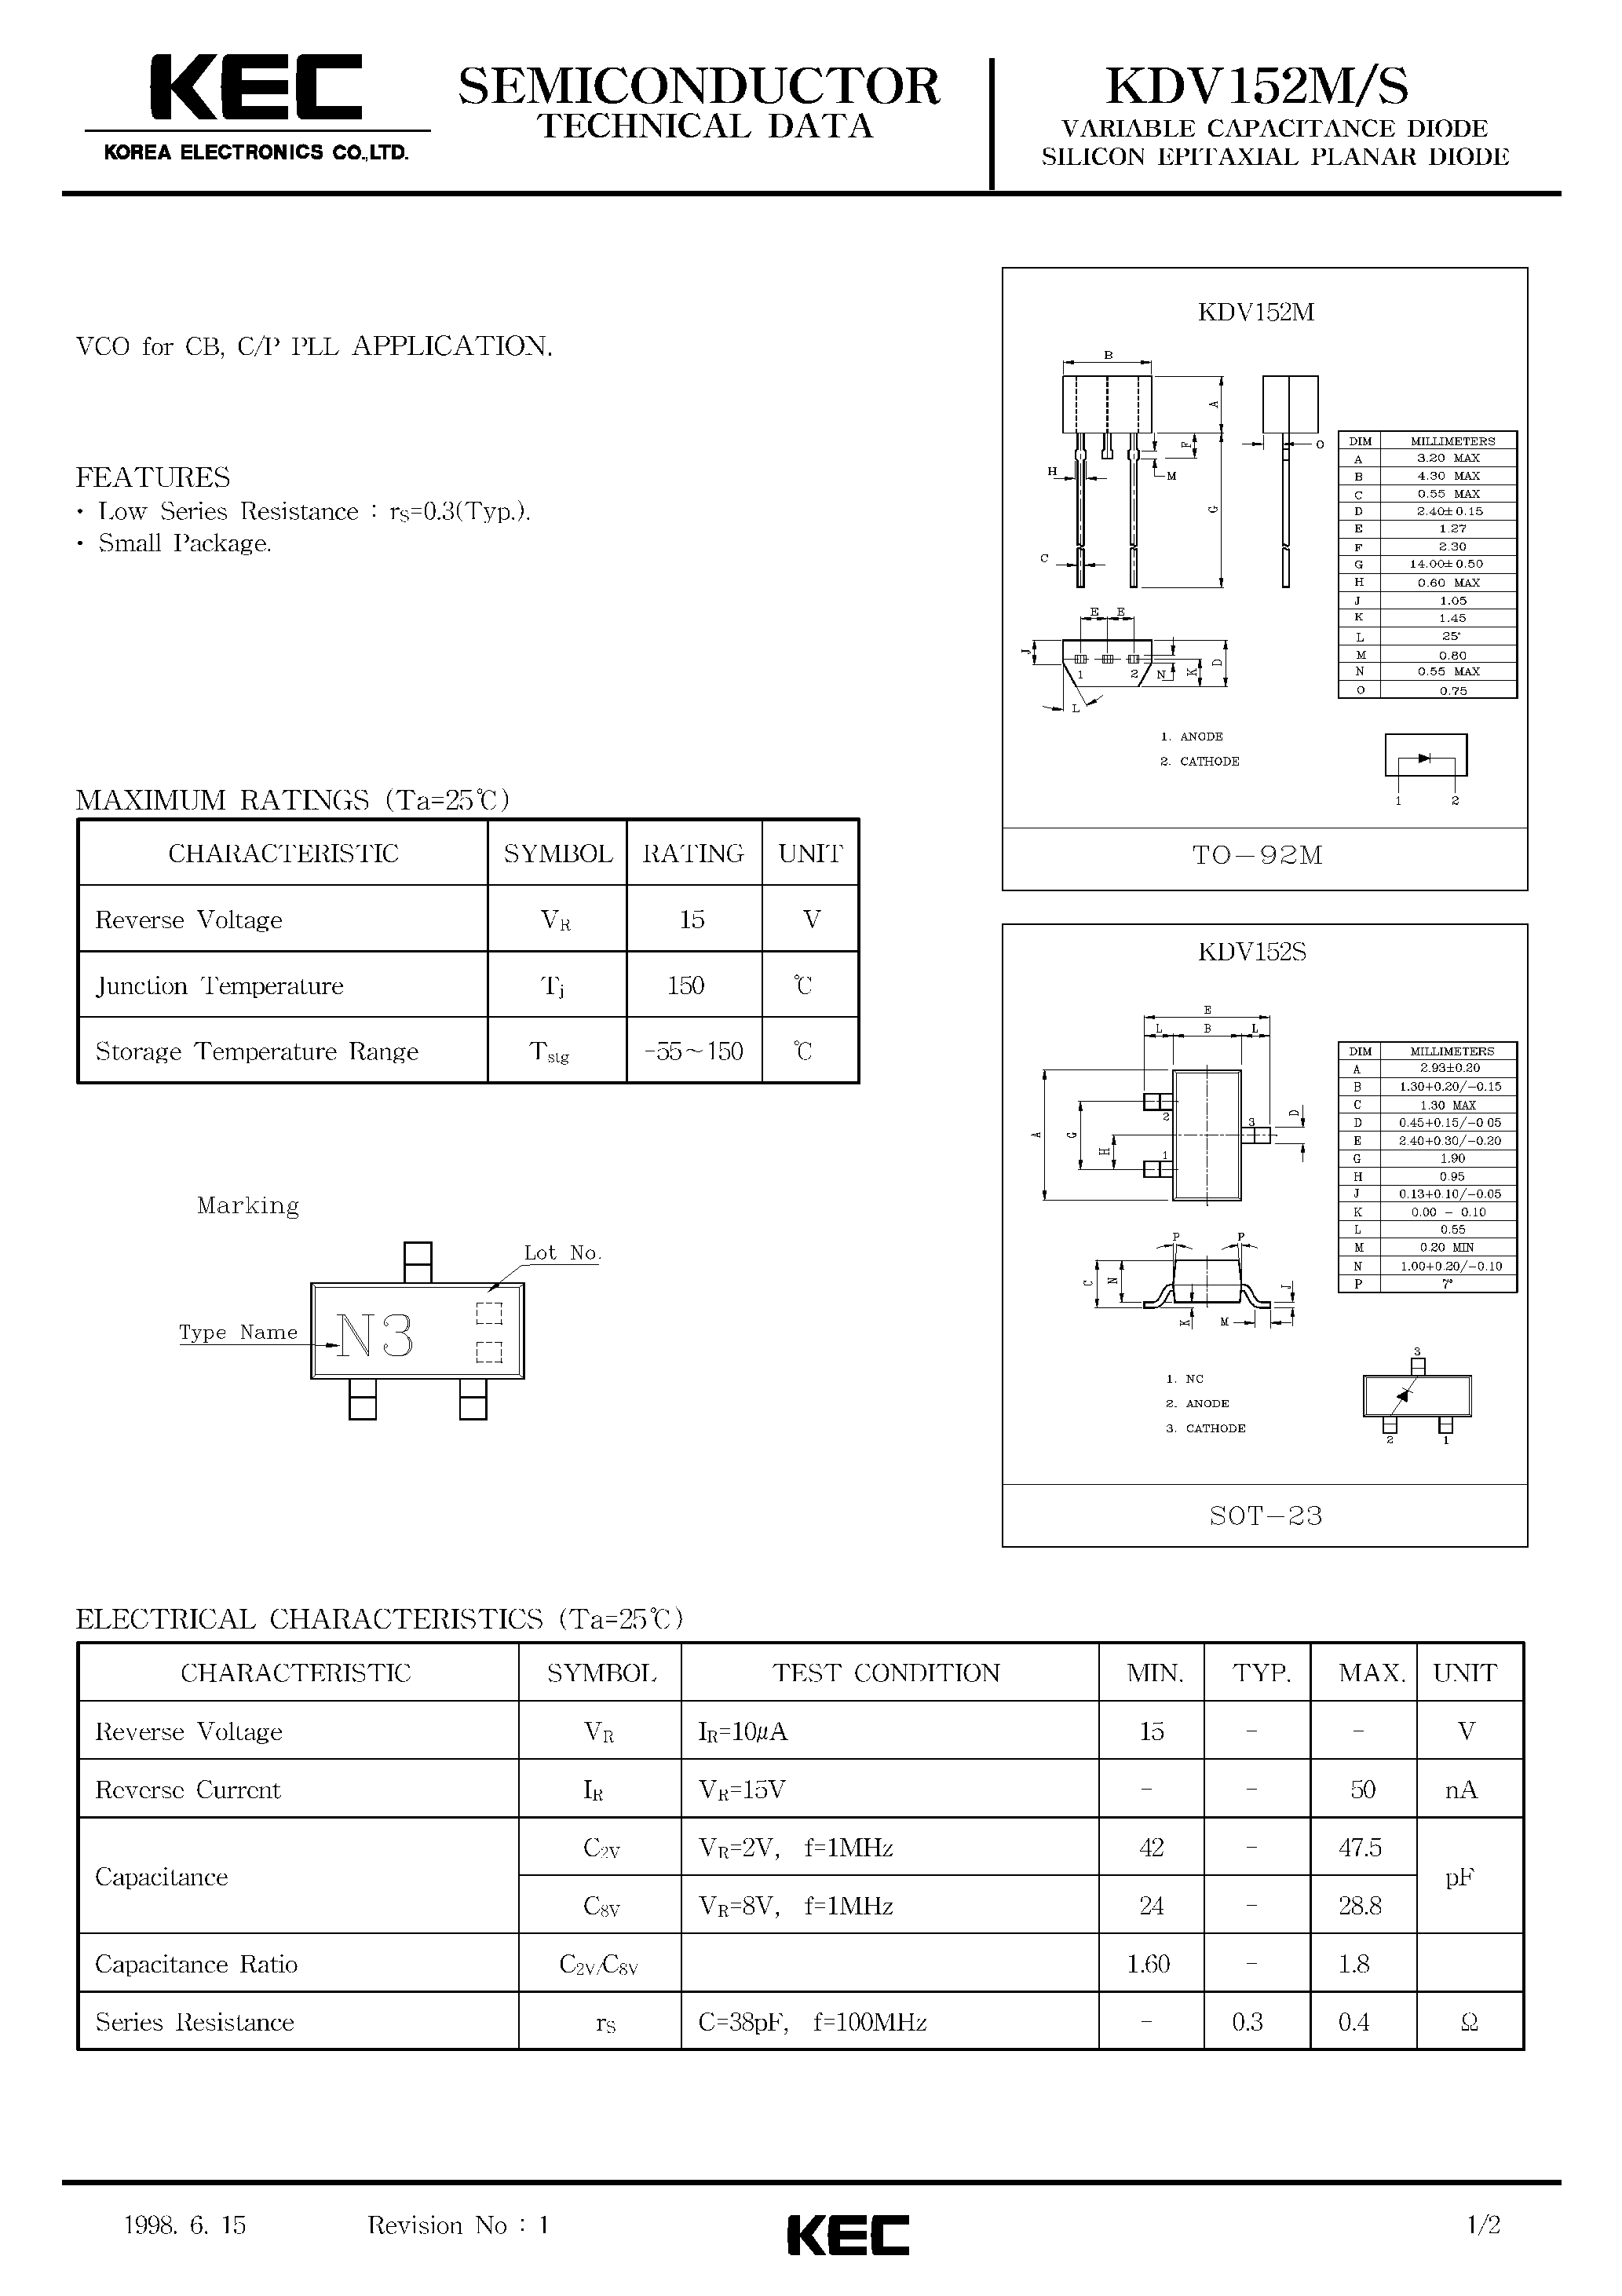 Datasheet KDV152 - VARIABLE CAPACITANCE DIODE SILICON EPITAXIAL PLANAR DIODE(VCO FOR CB/C/P PLL) page 1